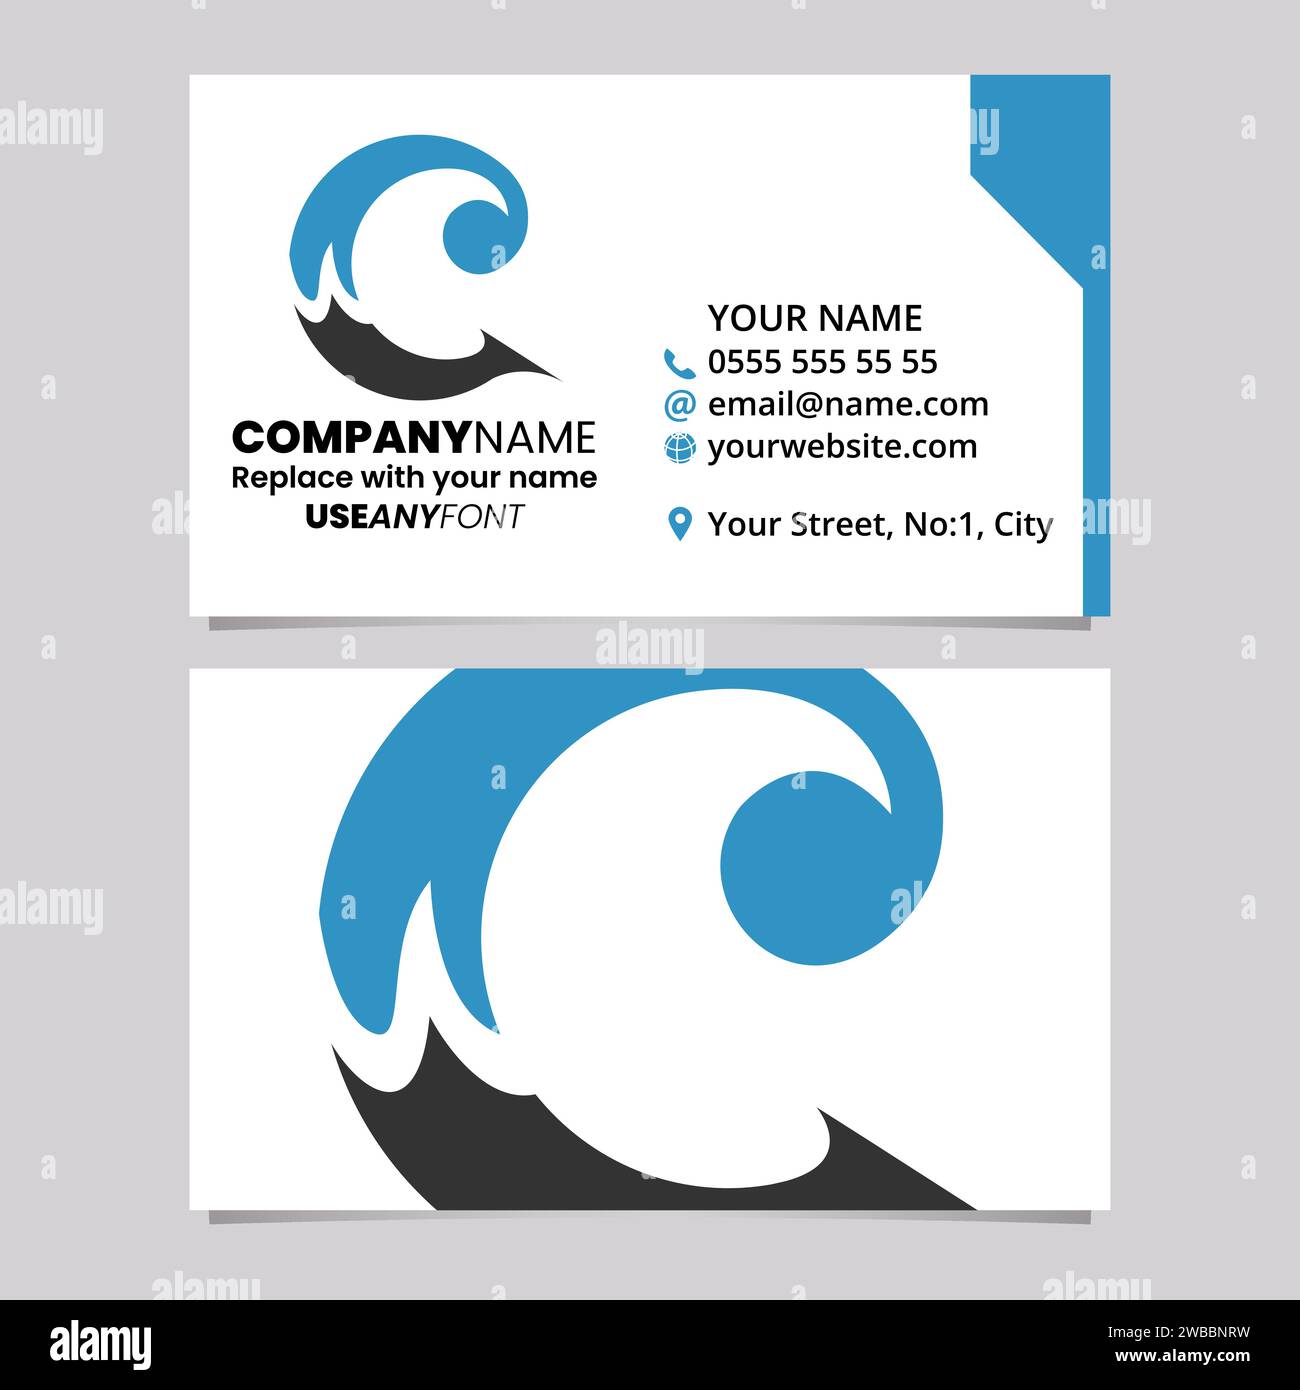 Blue and Black Business Card Template with Round Curly Letter C Logo Icon Over a Light Grey Background Stock Vector